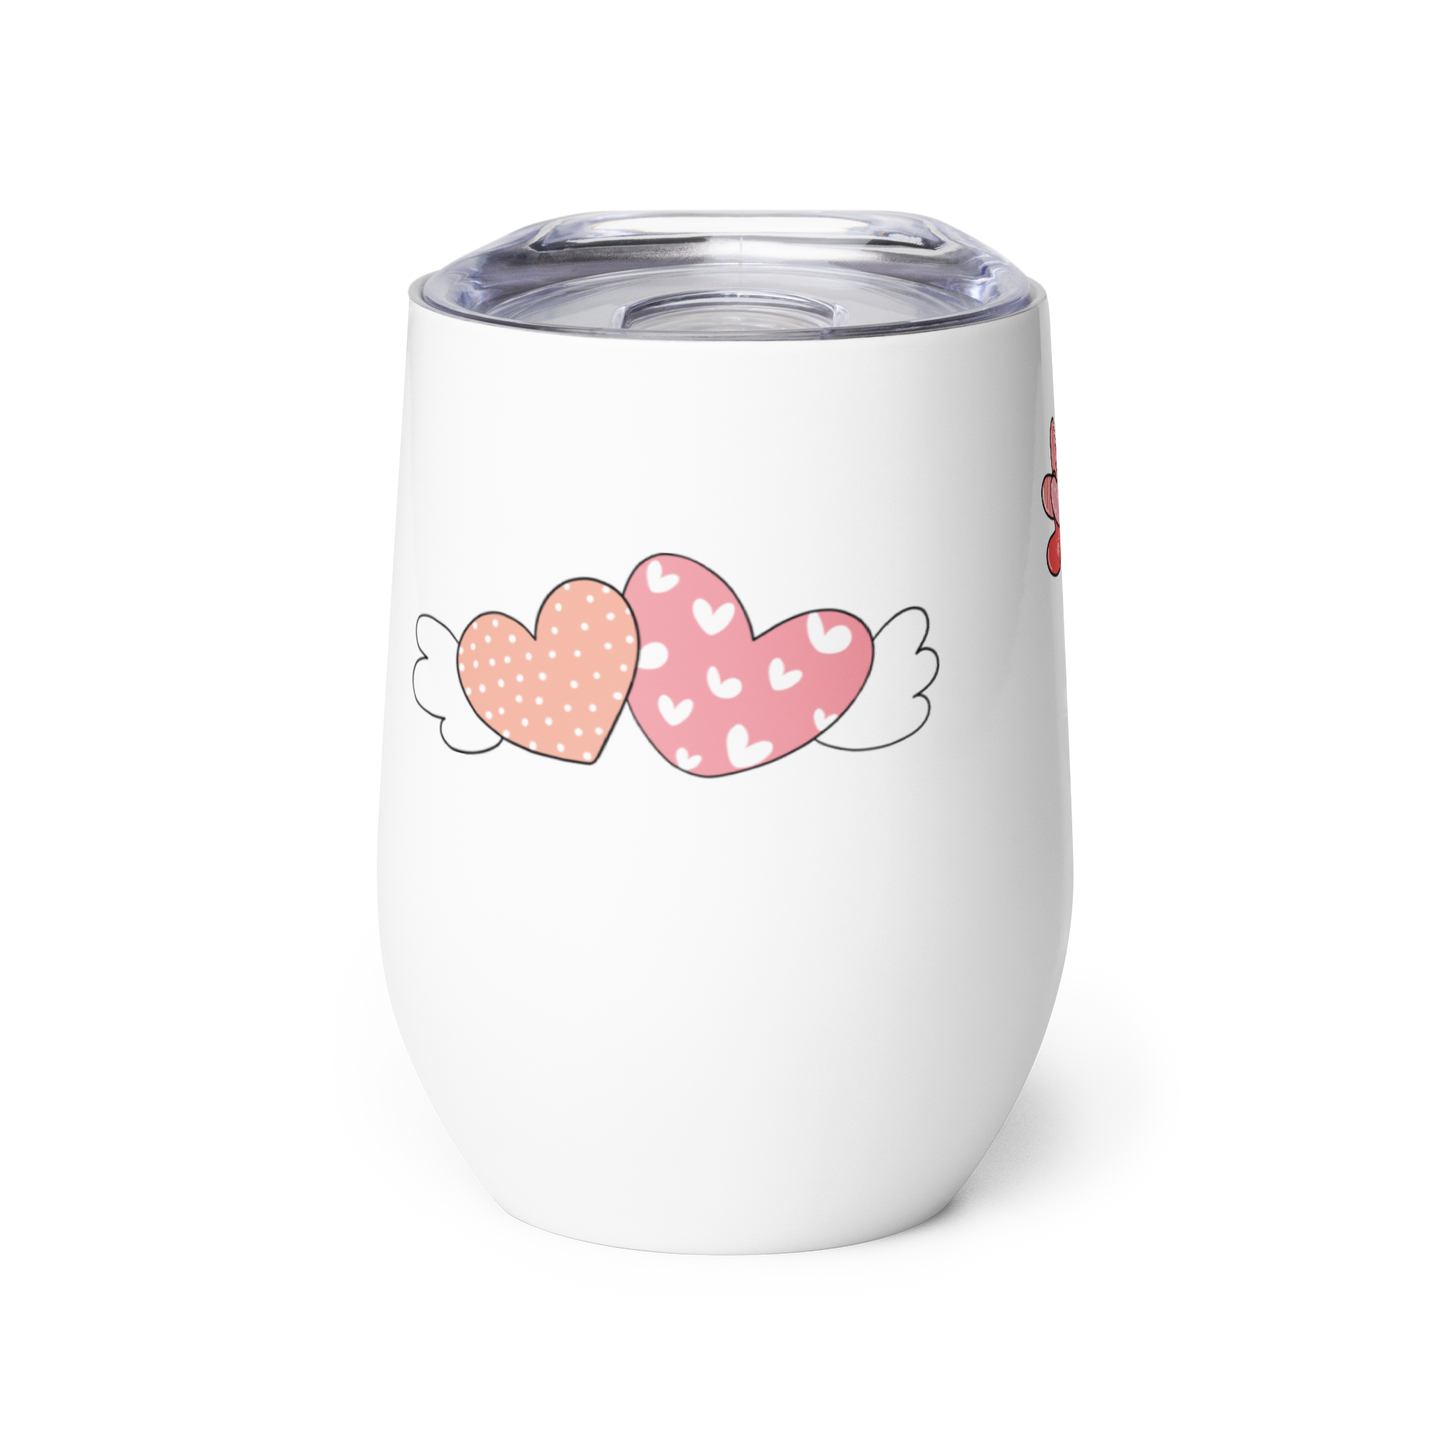 Lovey Dovey Gnomies Wine Tumbler – Sip and Share the Love! - Expressive DeZien 